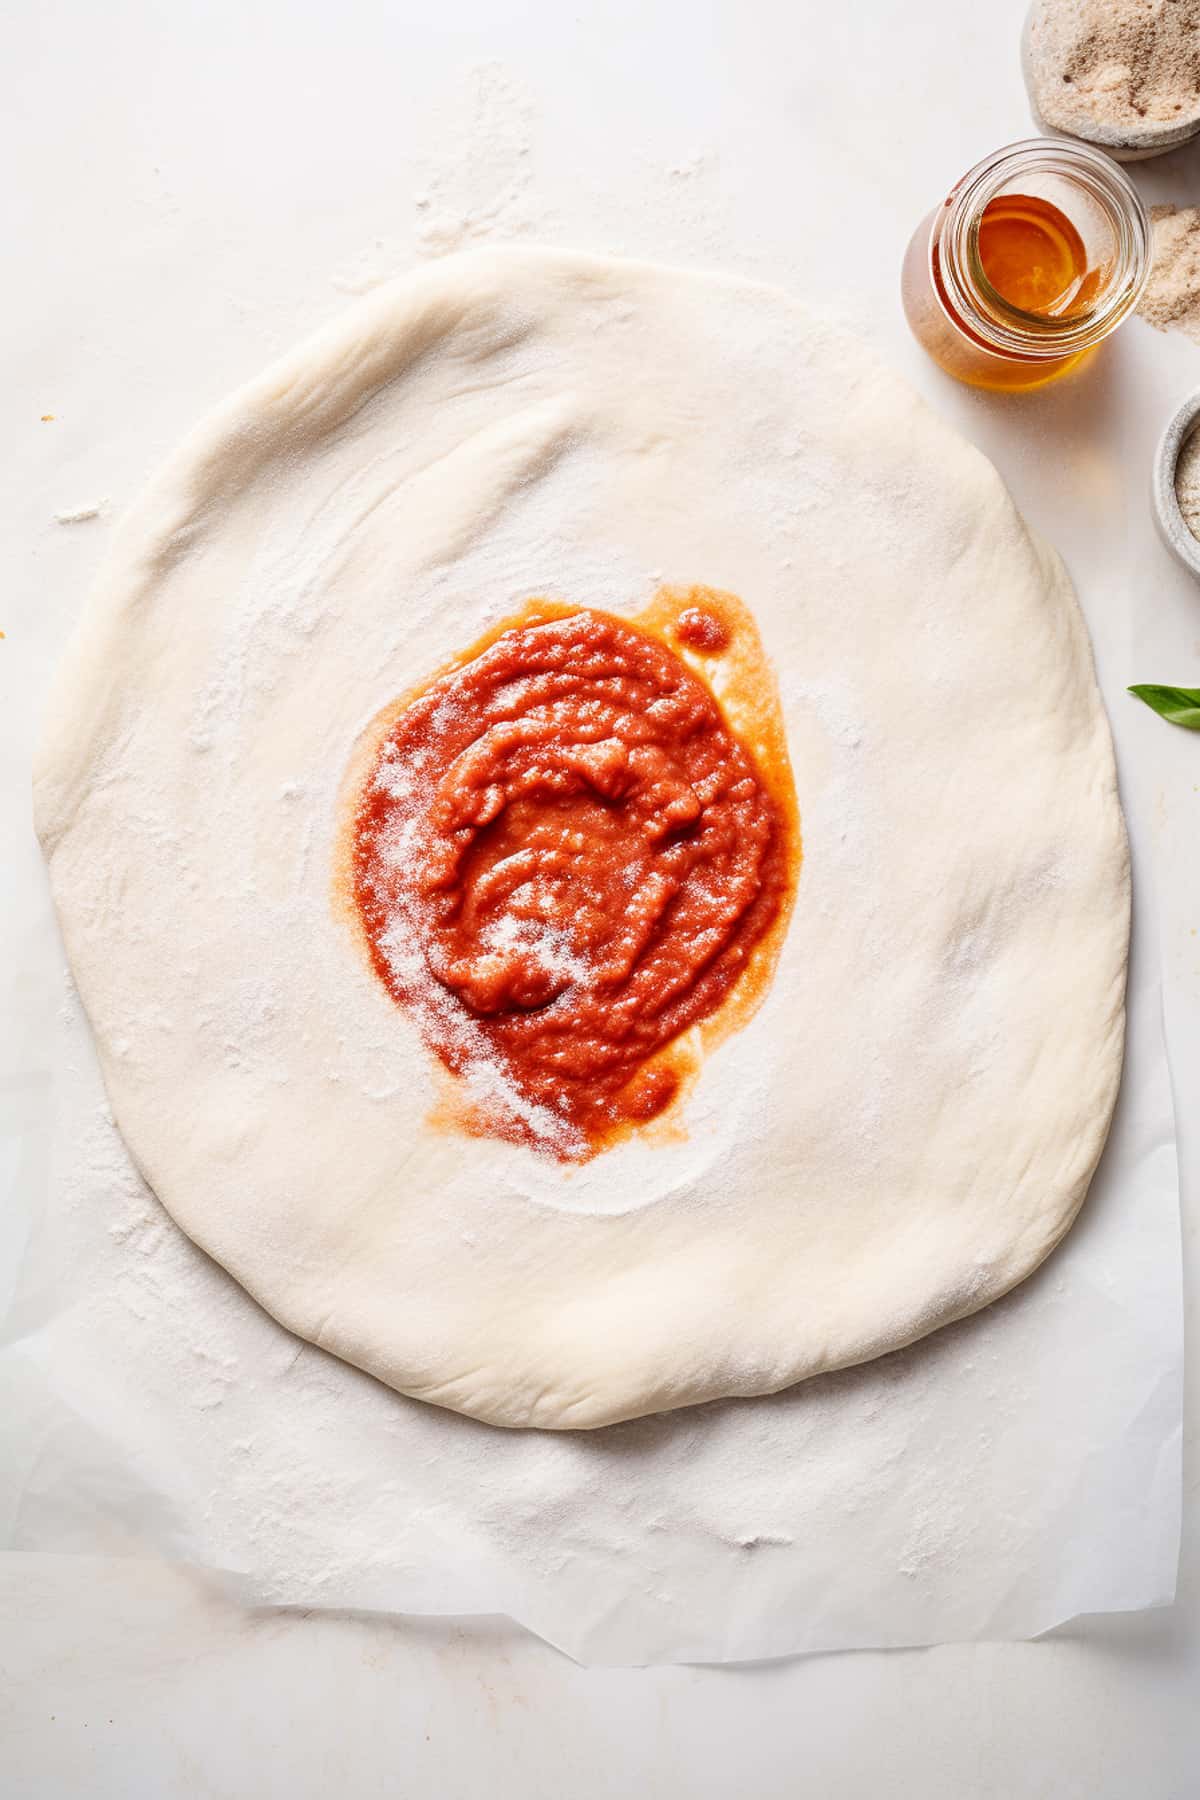 Pizza dough with sauce spread on it.